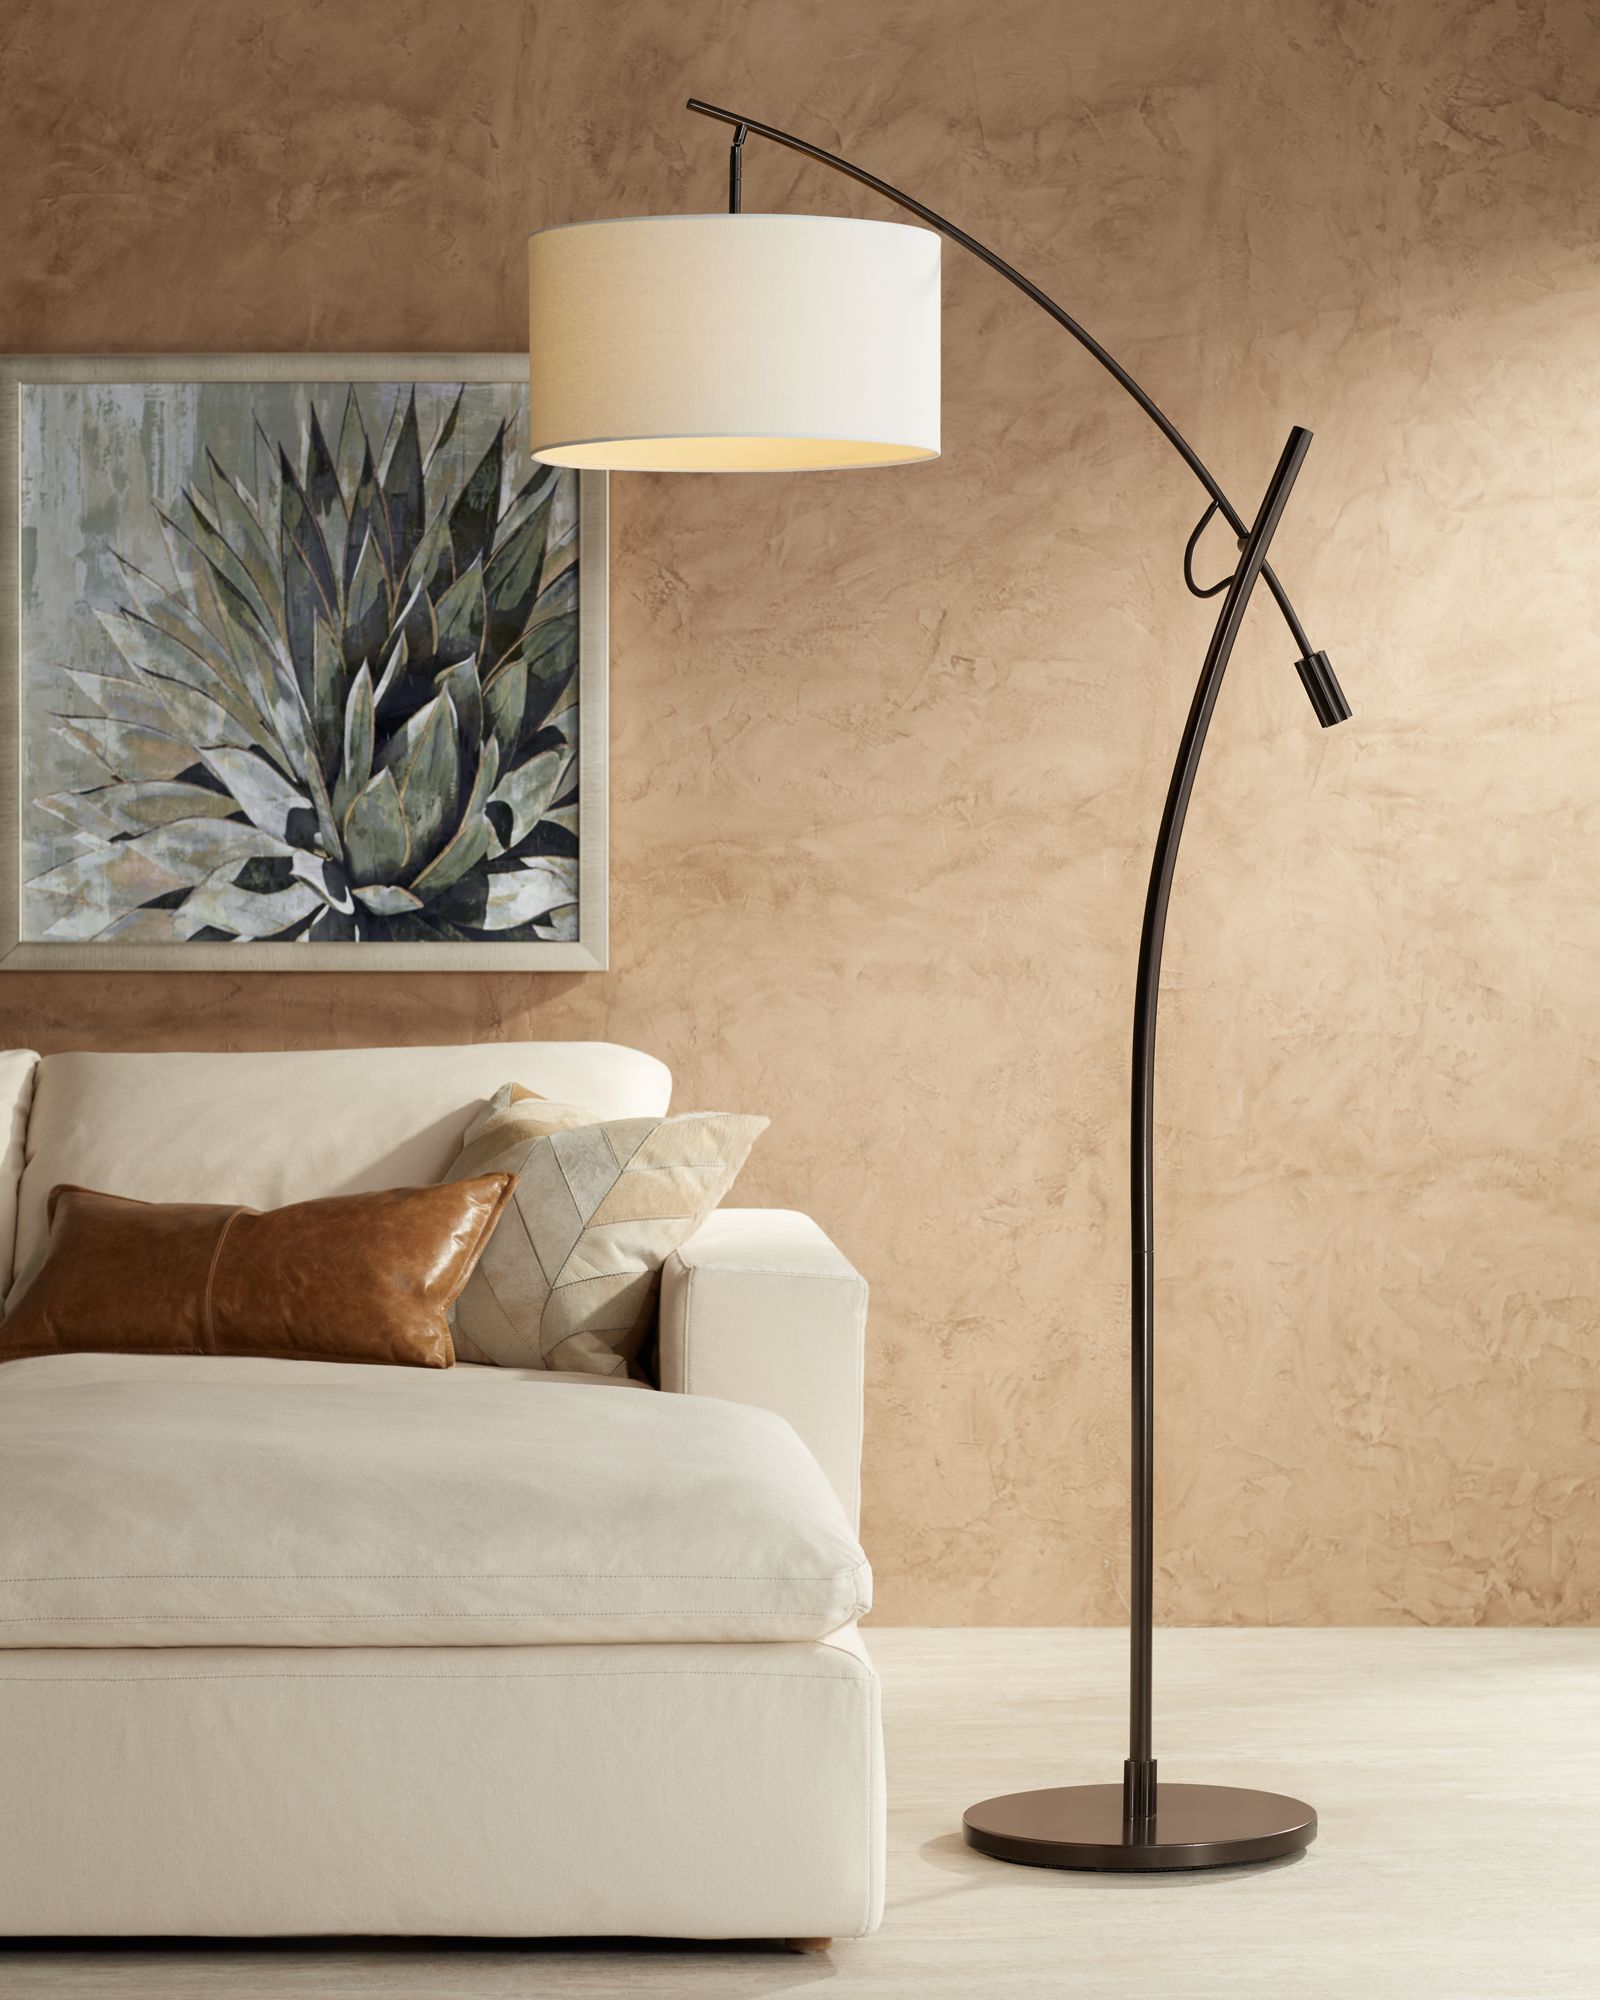 Perfect arched floor lamps